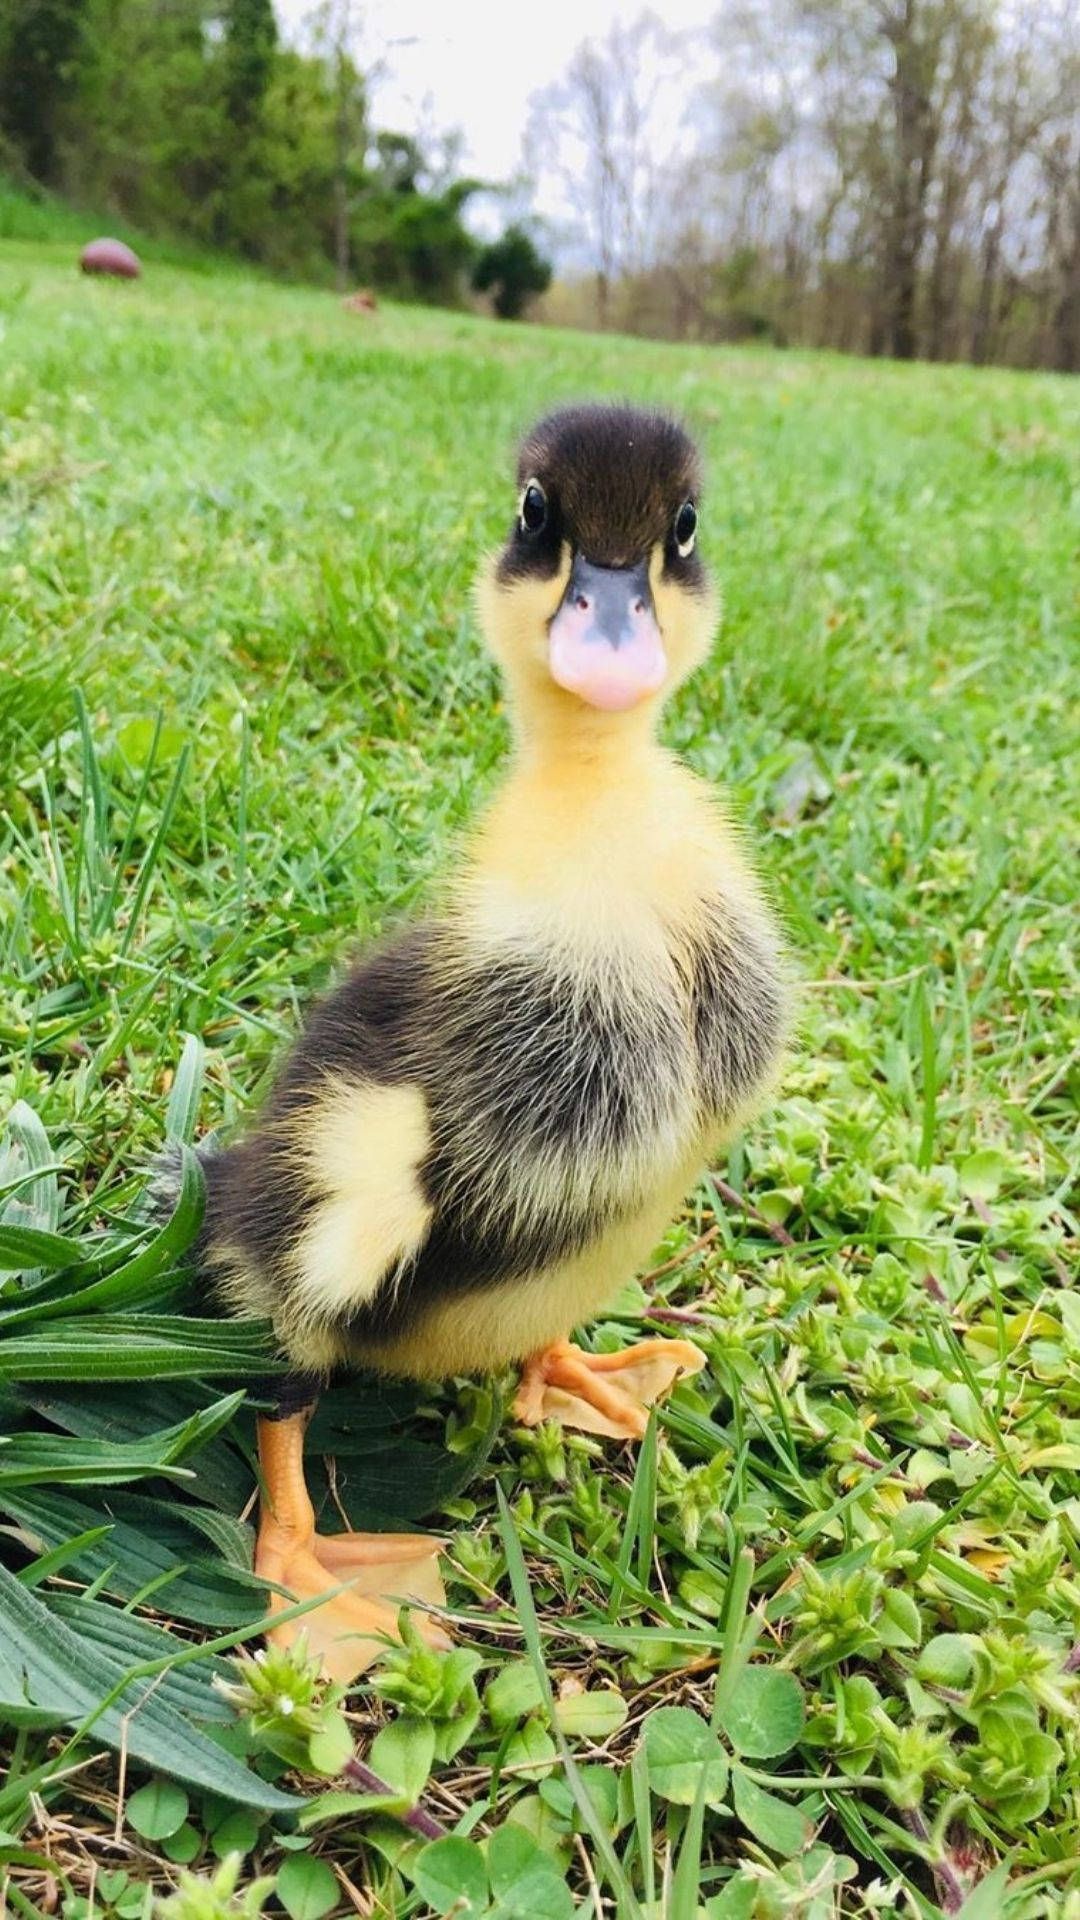 A duckling standing on the grass - Duck